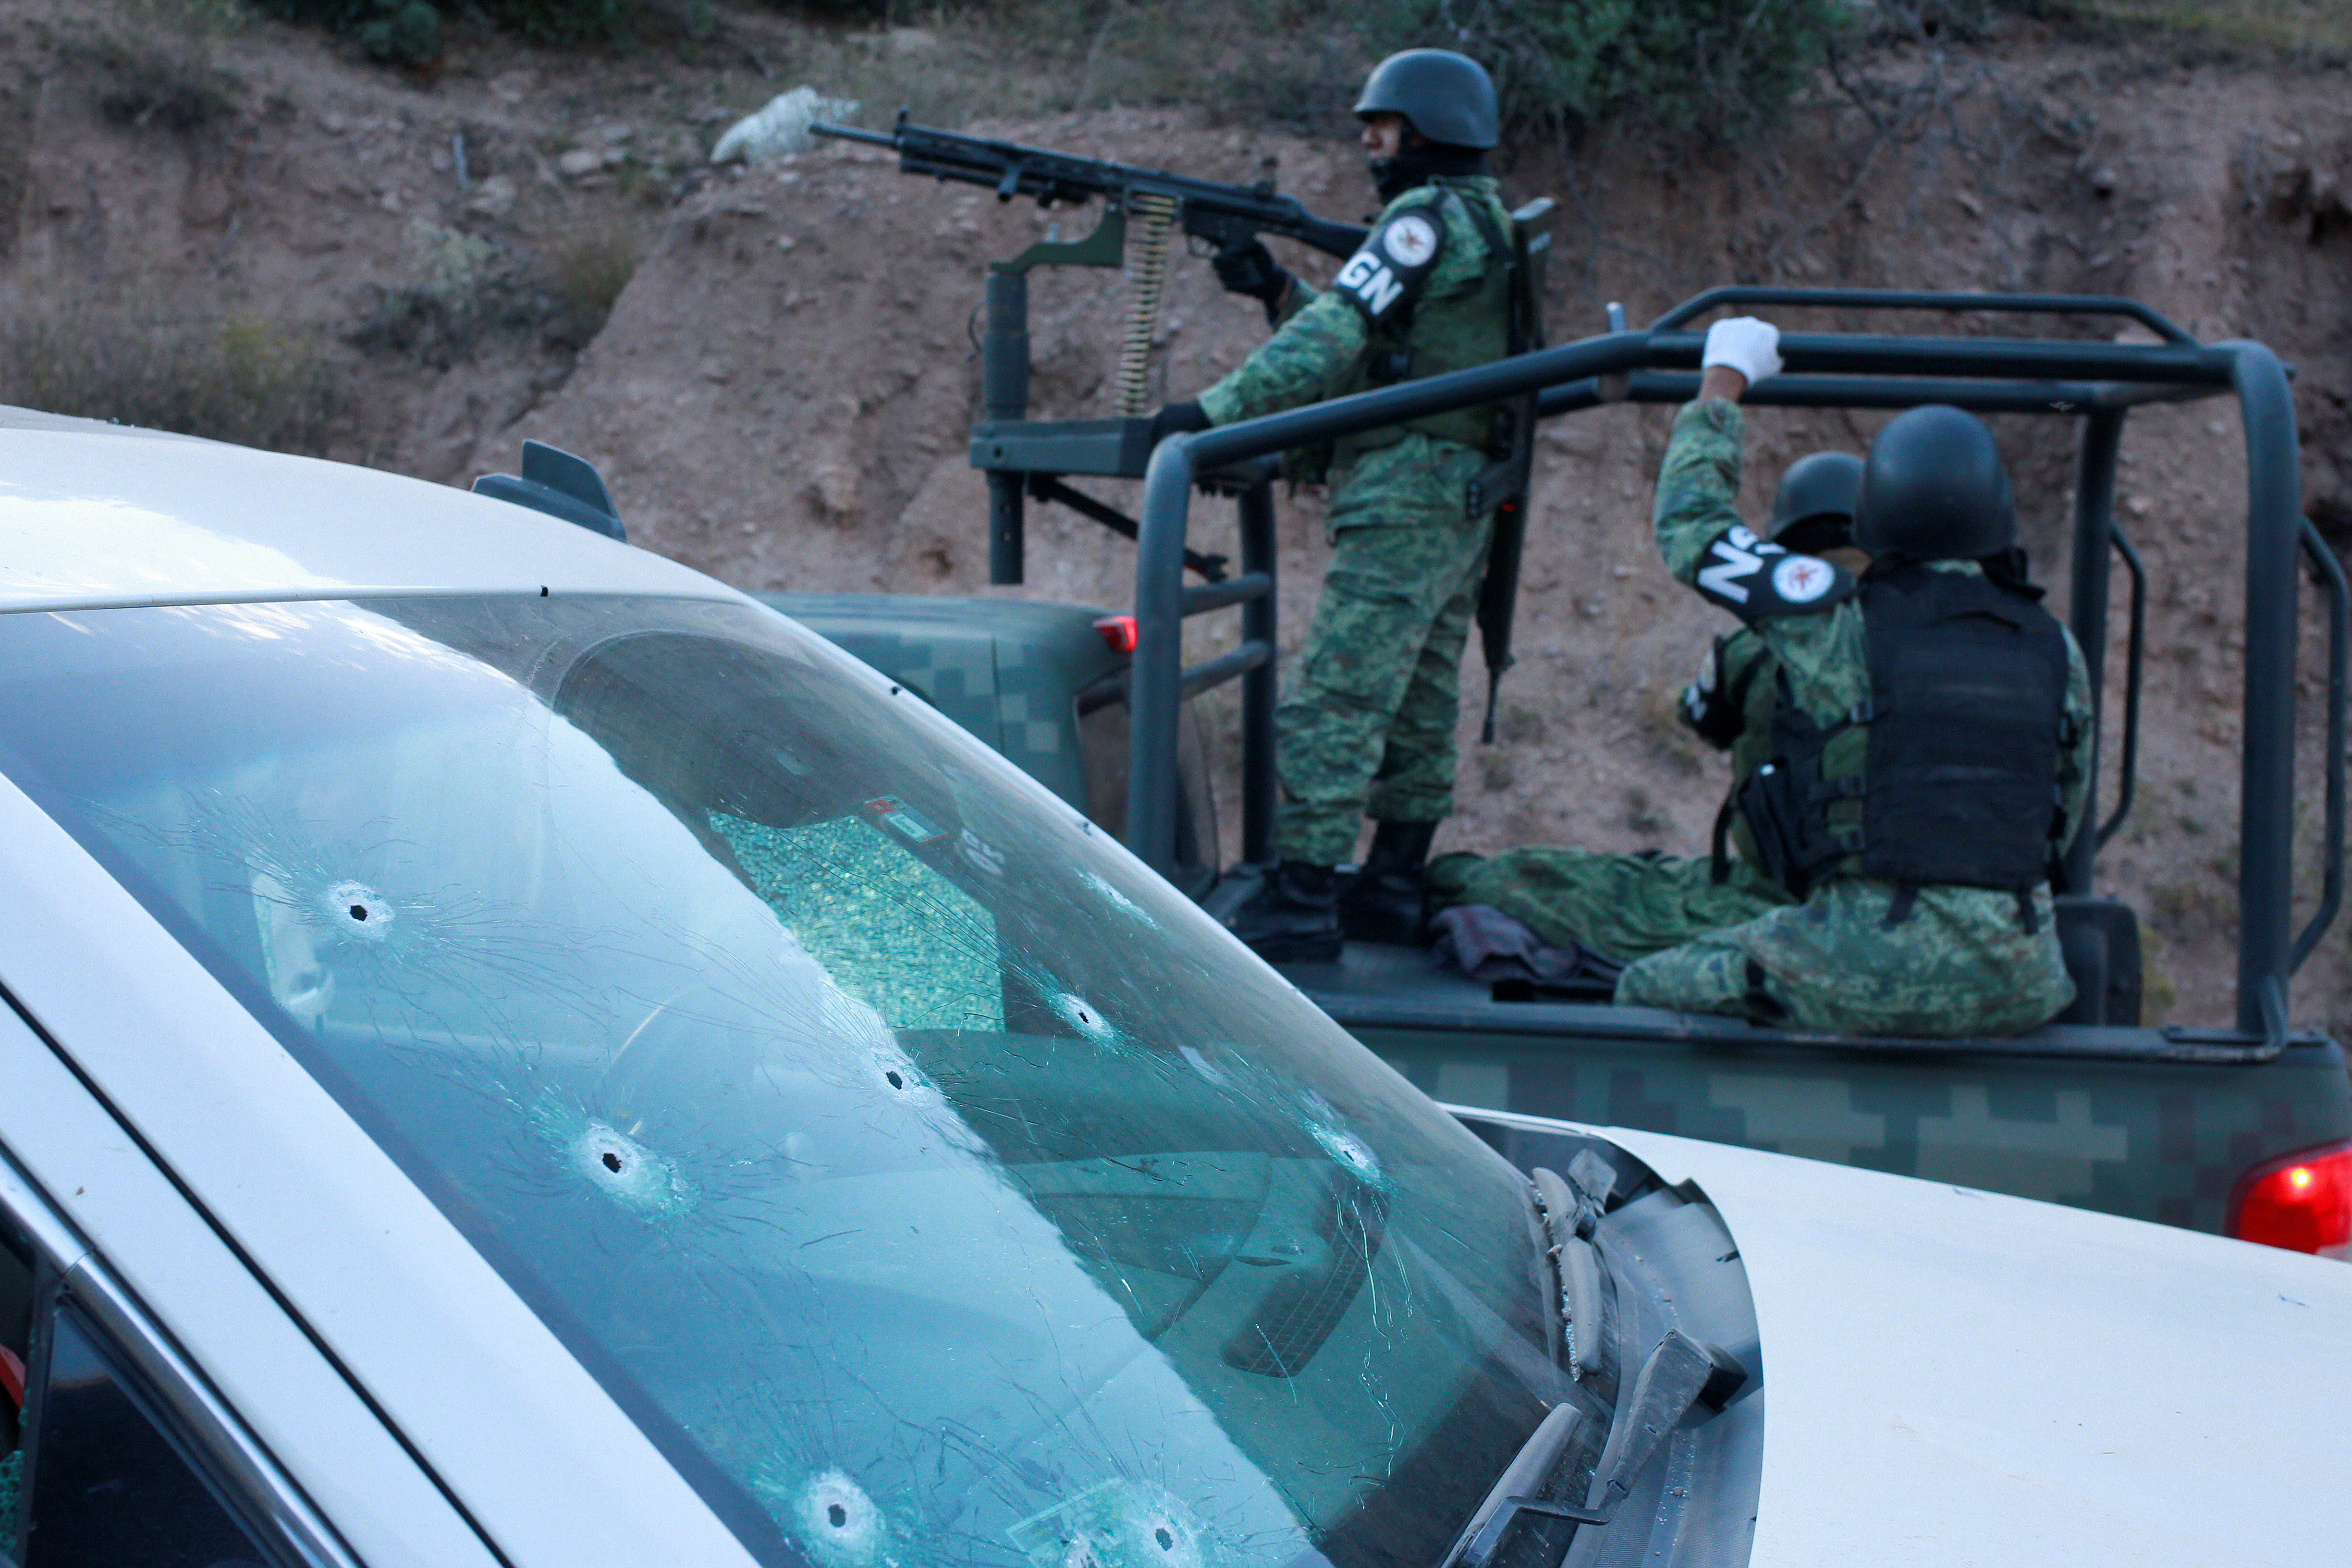 Soldiers assigned to Mexico's National Guard pass by a bullet-riddled vehicle belonging to Mexican-American Mormon families that were killed by unknown assailants, in Bavispe